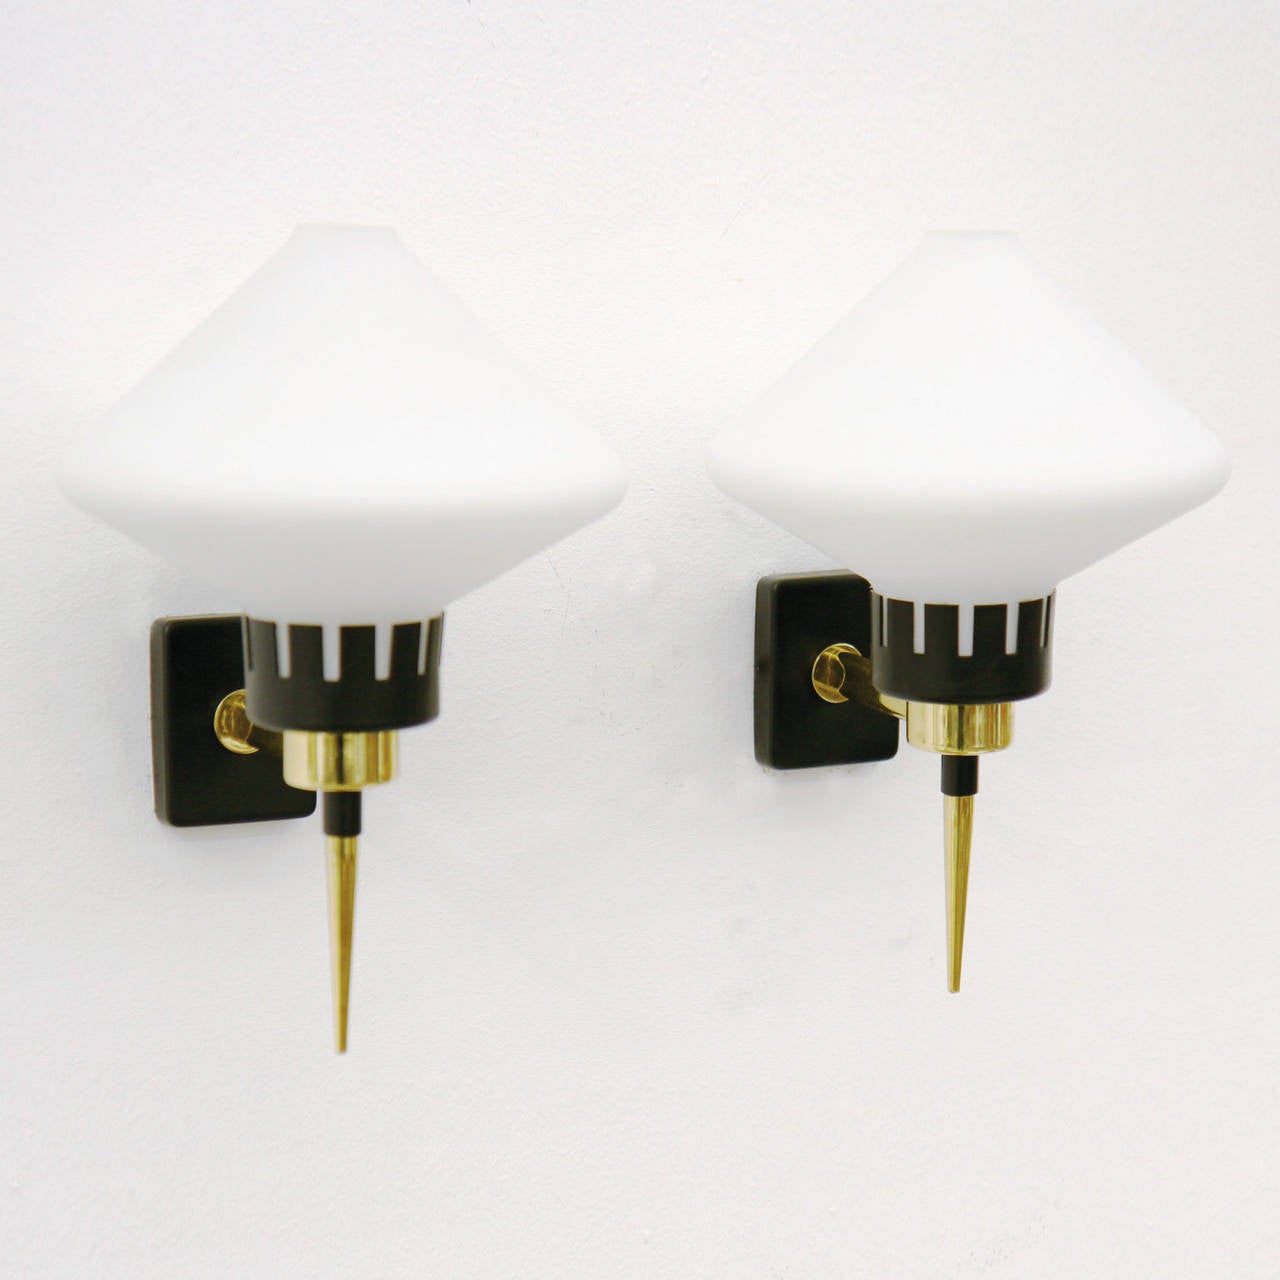 Elegant pair of Italian mid century torch-style sconces. Satinated glass on lacquered aluminum and brass. One E14 socket per item with new wiring.